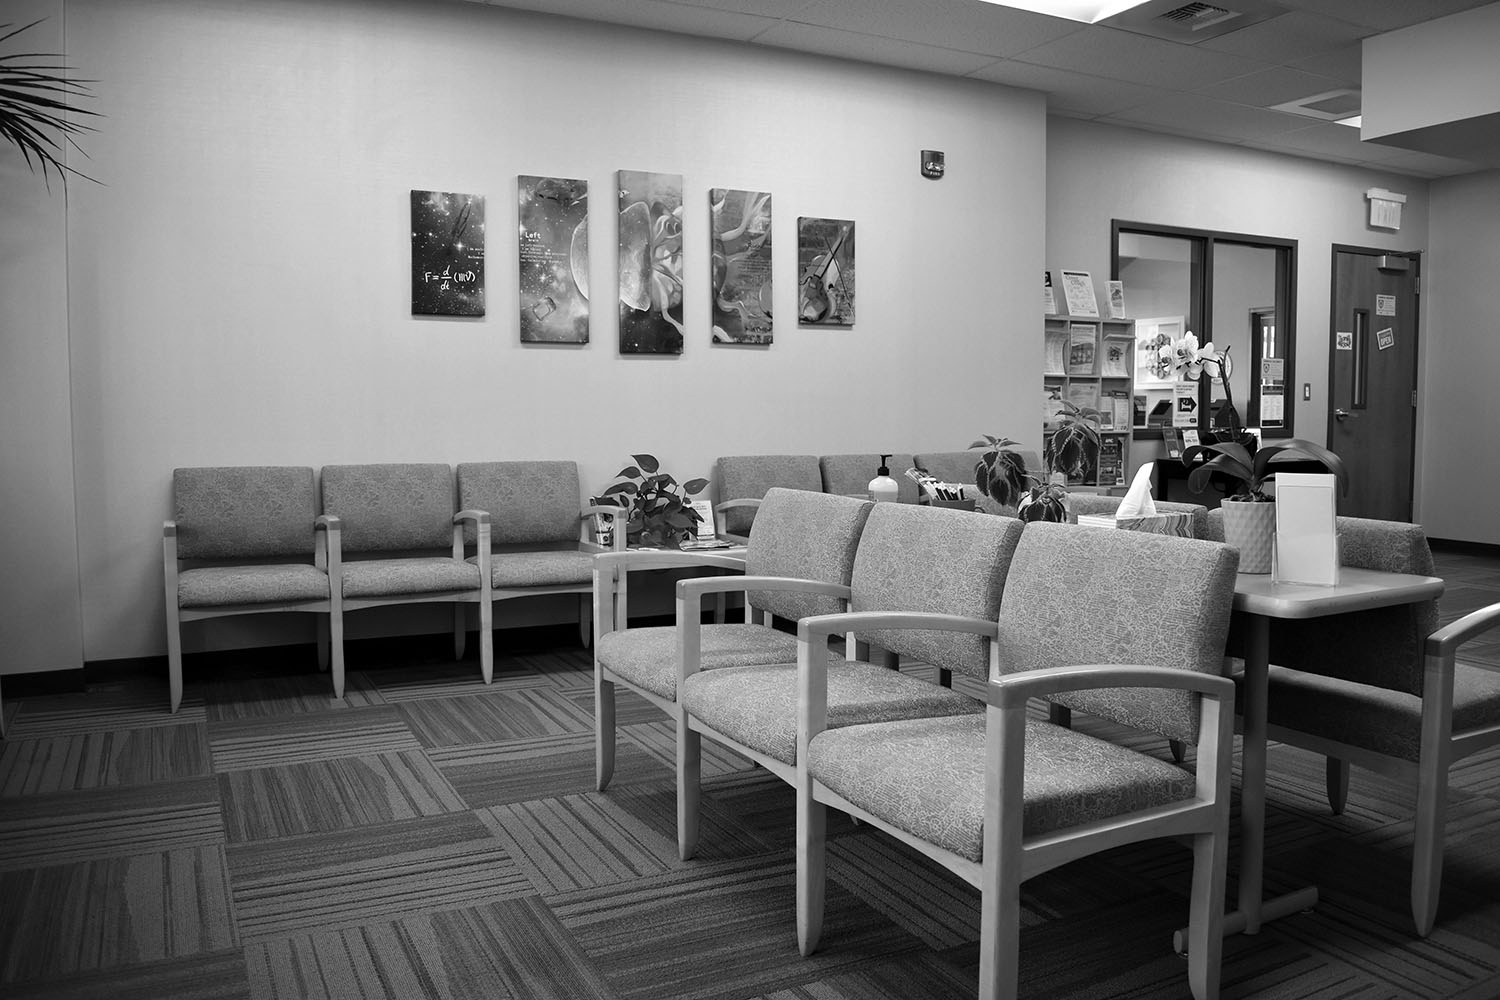 Waiting room of the SCC Health Clinic